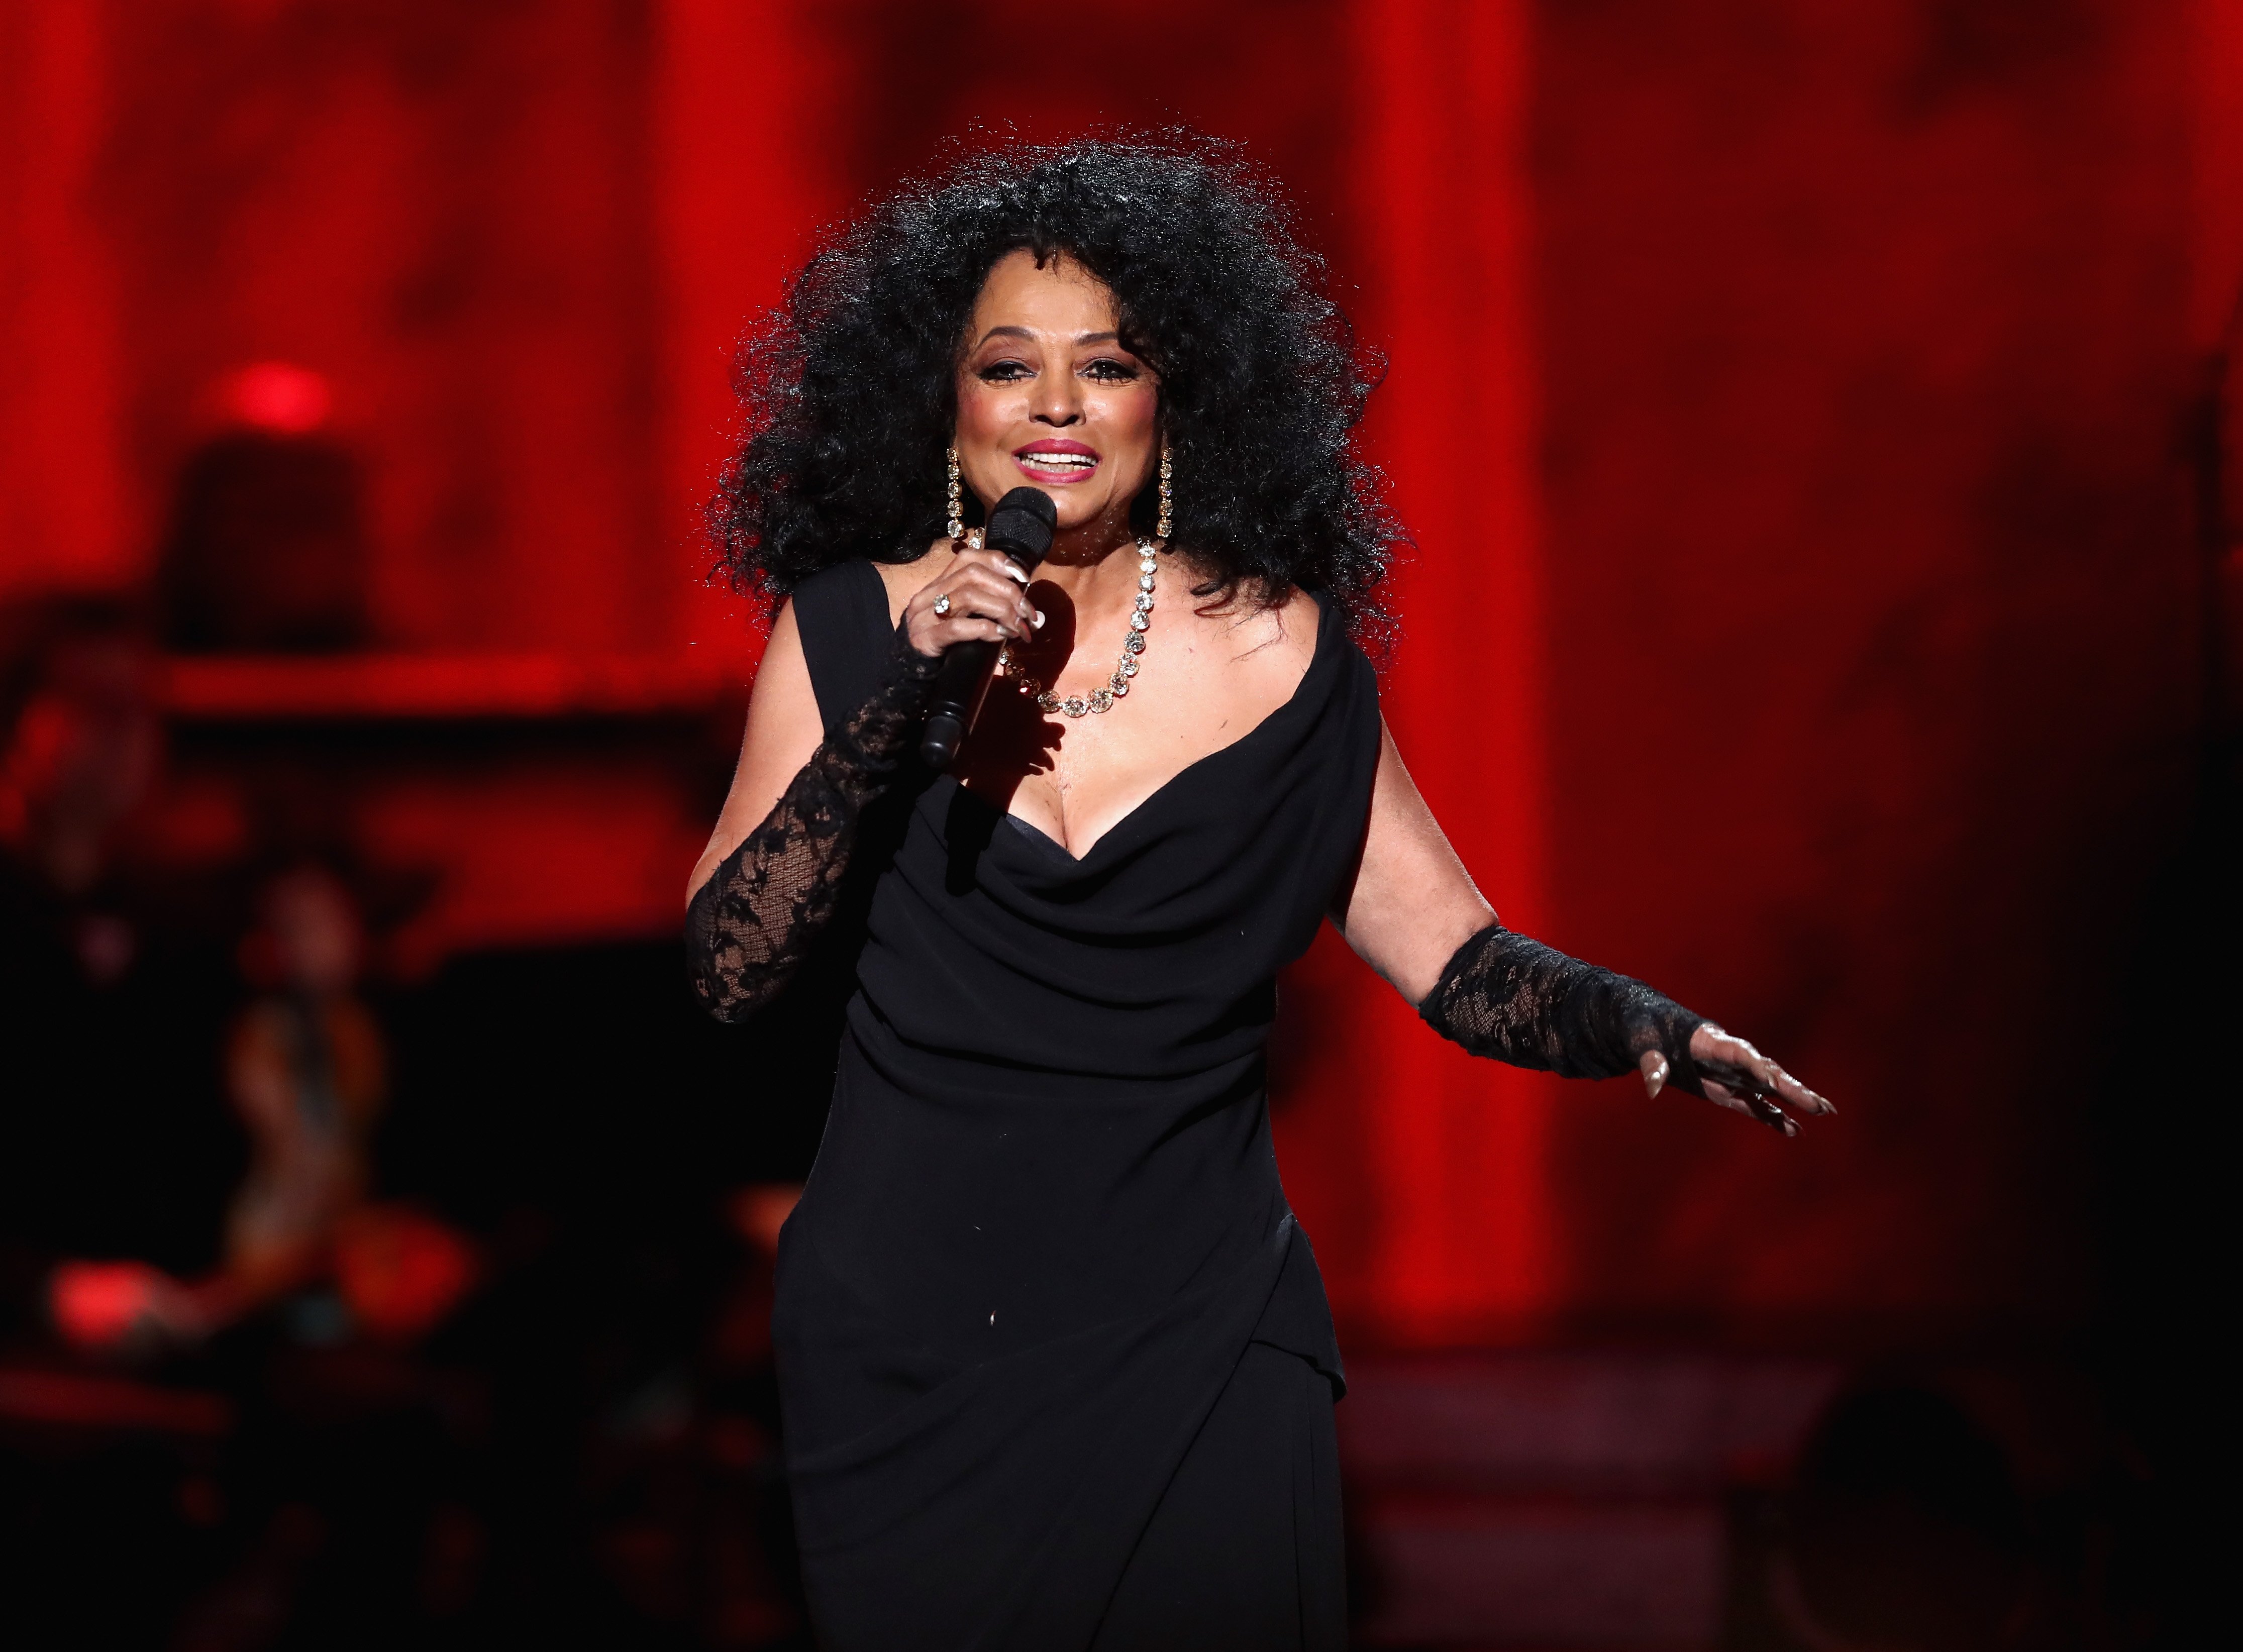 Diana Ross performs onstage during Motown 60: A GRAMMY Celebration at Microsoft Theater on February 12, 2019, in Los Angeles, California. | Photo: Getty Images.